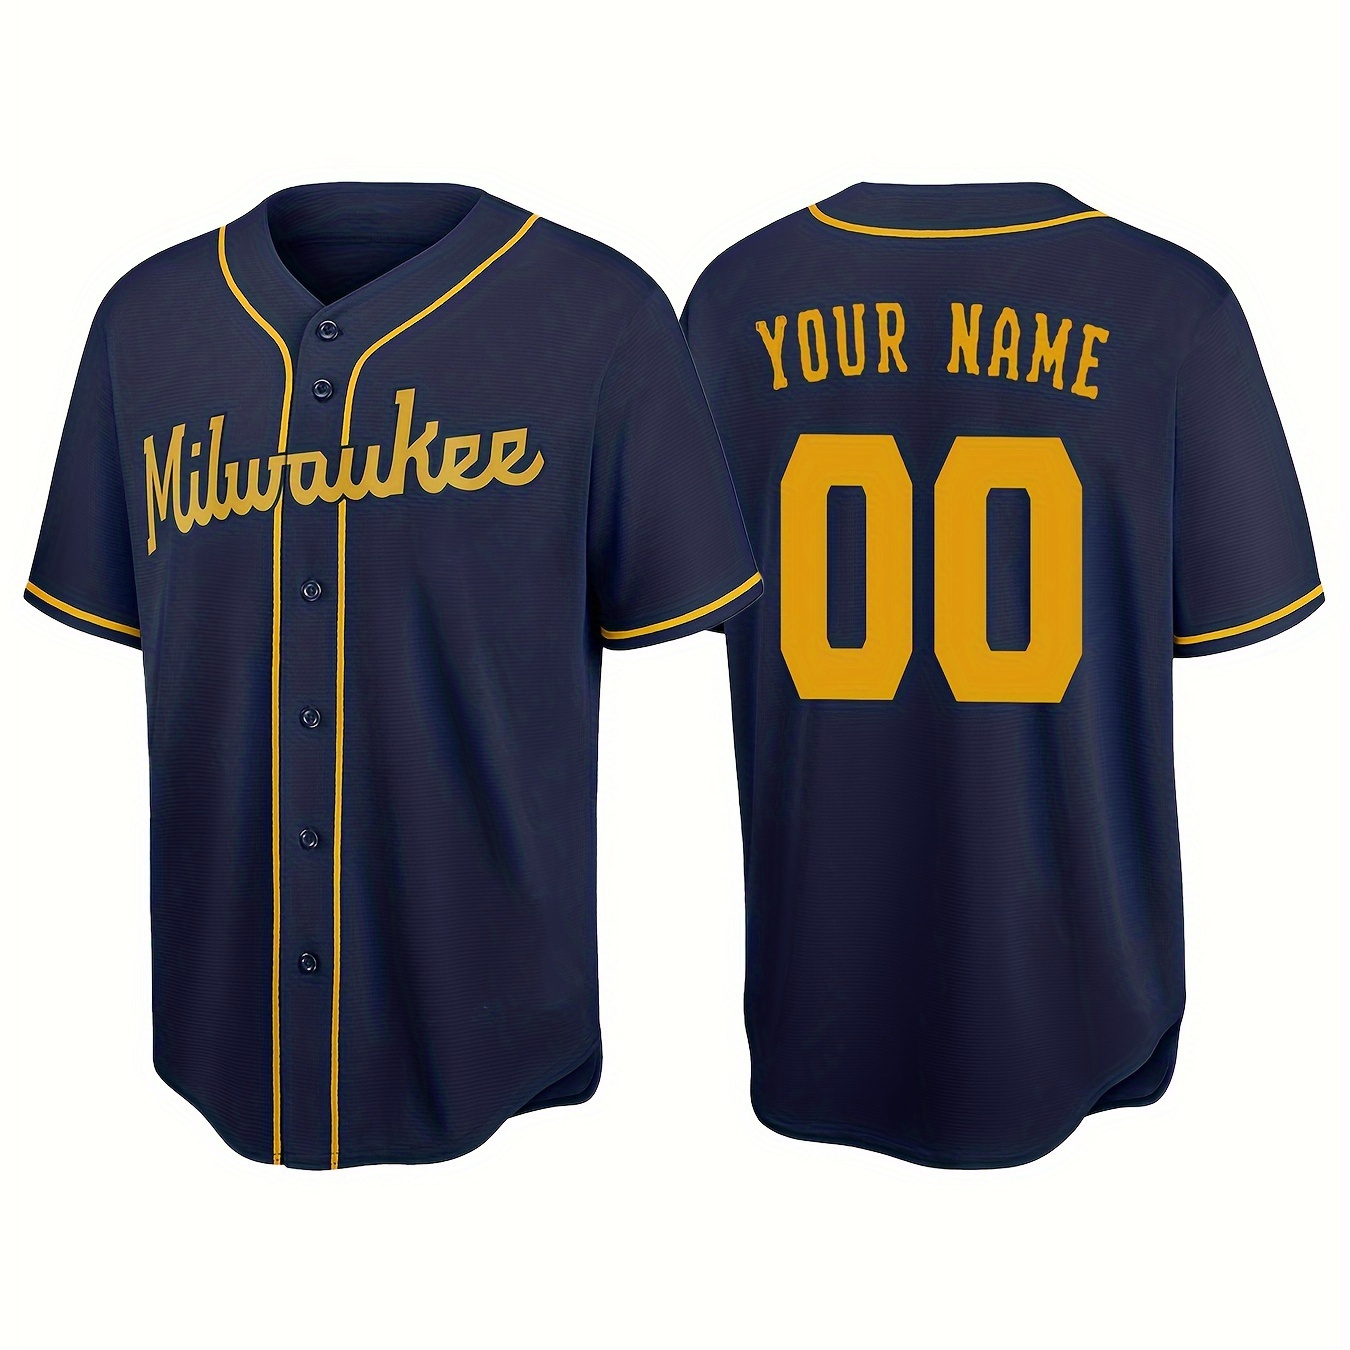 

Customizable Name And Number Men's Baseball Jersey V-neck Blue Embroidered Outdoor Leisure Sports Customization S-3xl